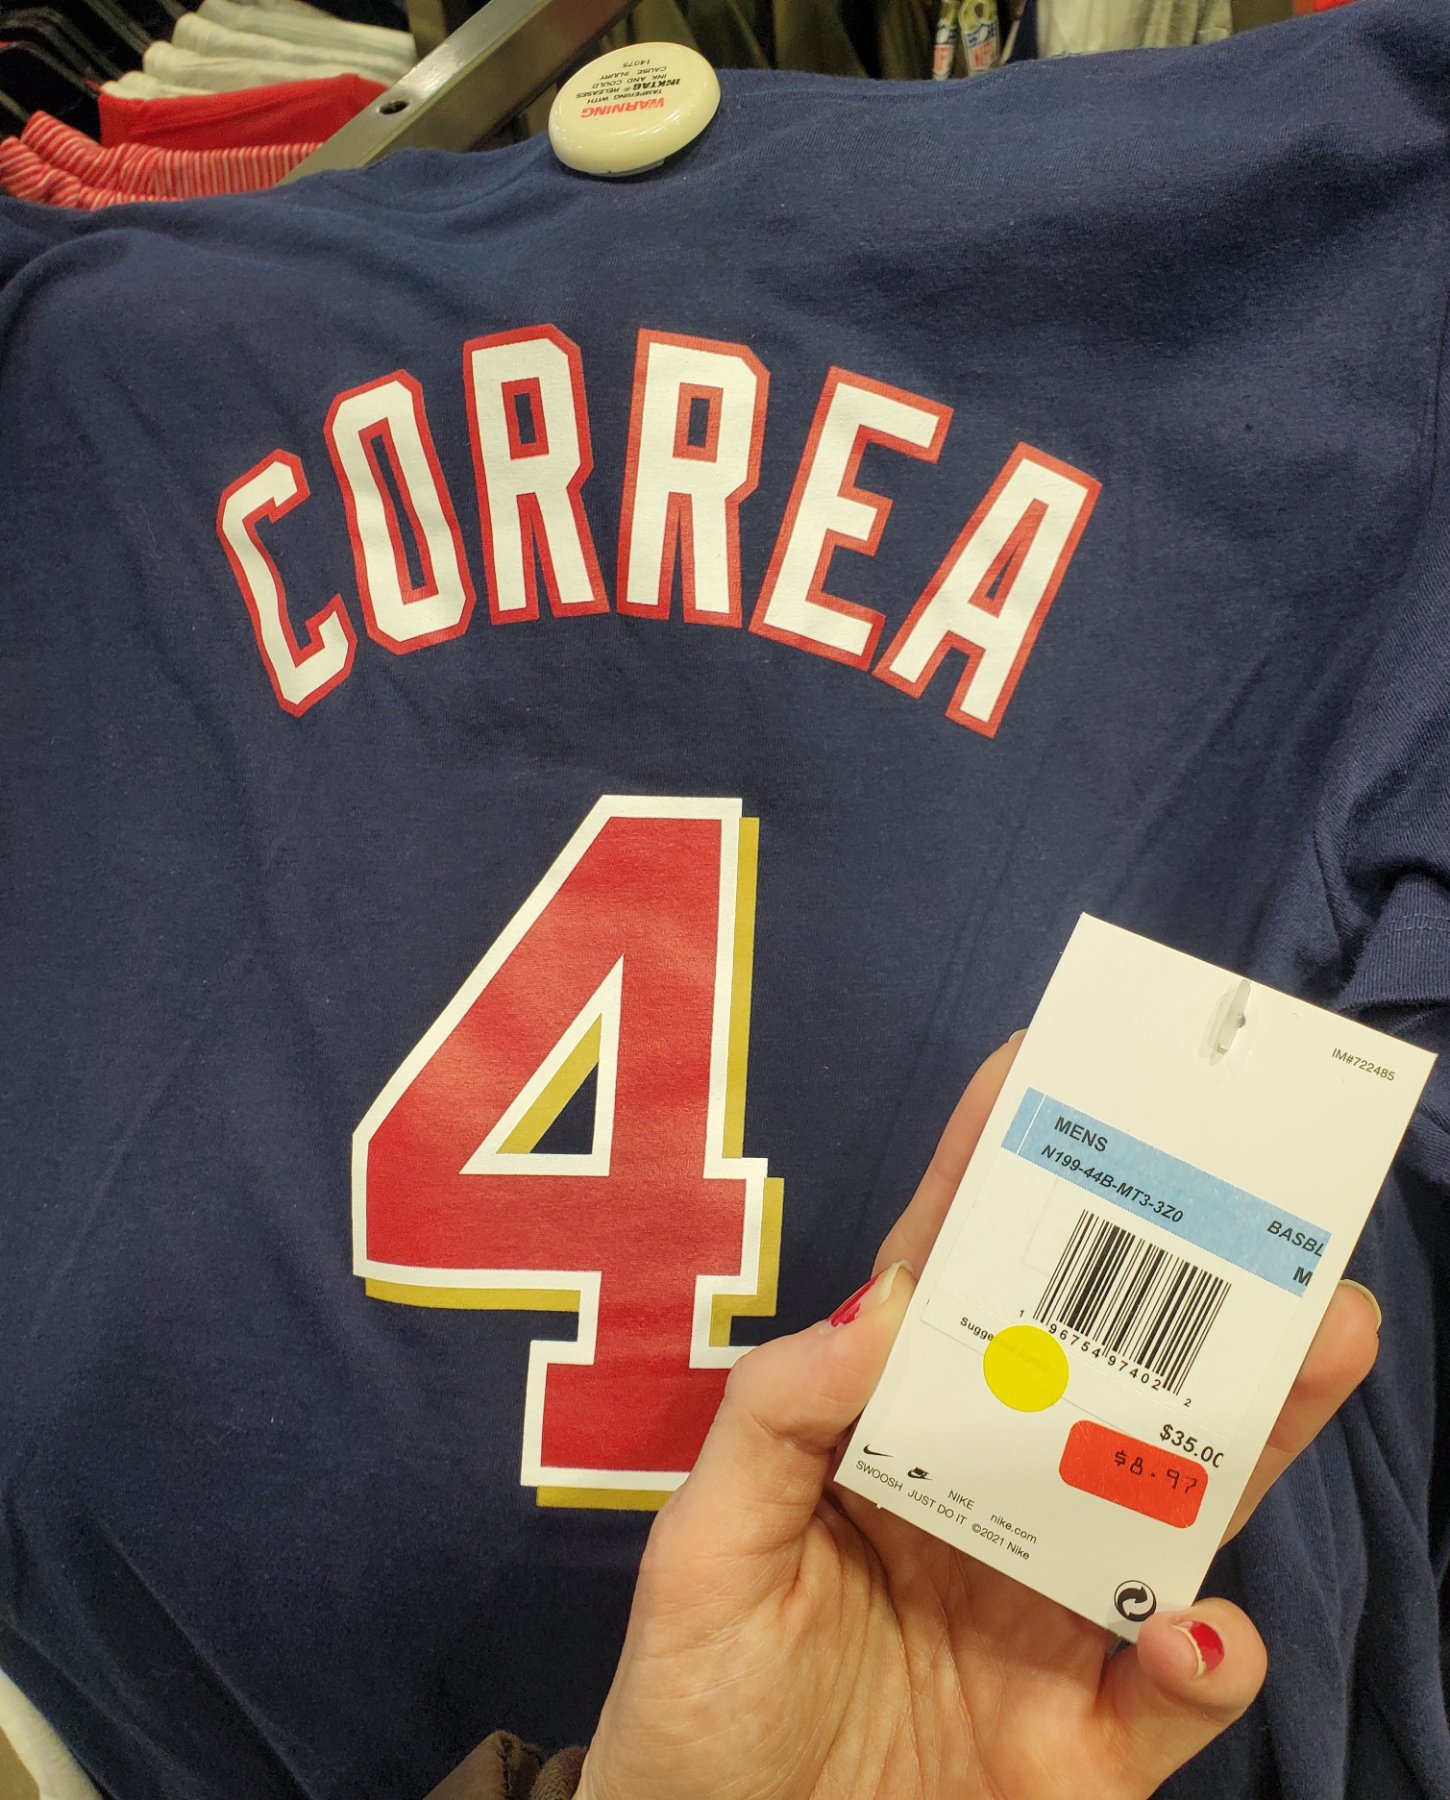 Twins Fans Scoop Up Clearance Apparel After Correa Re-Signs With Twins -  Twins - Twins Daily